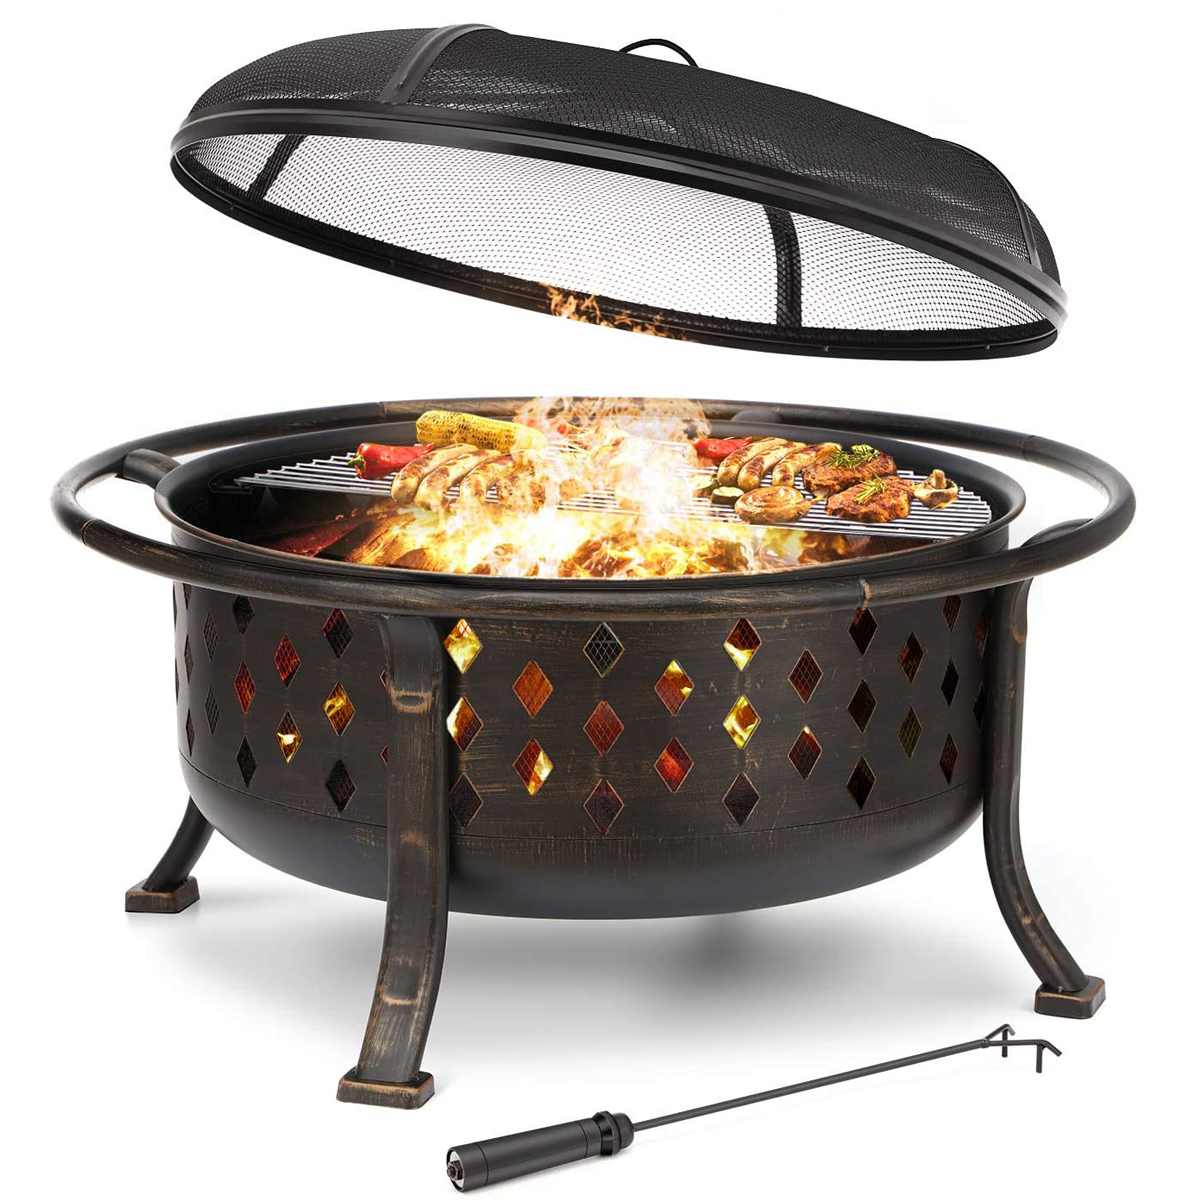 Kingso 36 Fire Pit Outdoor Large Steel, Large Wood Fire Pit Bowl